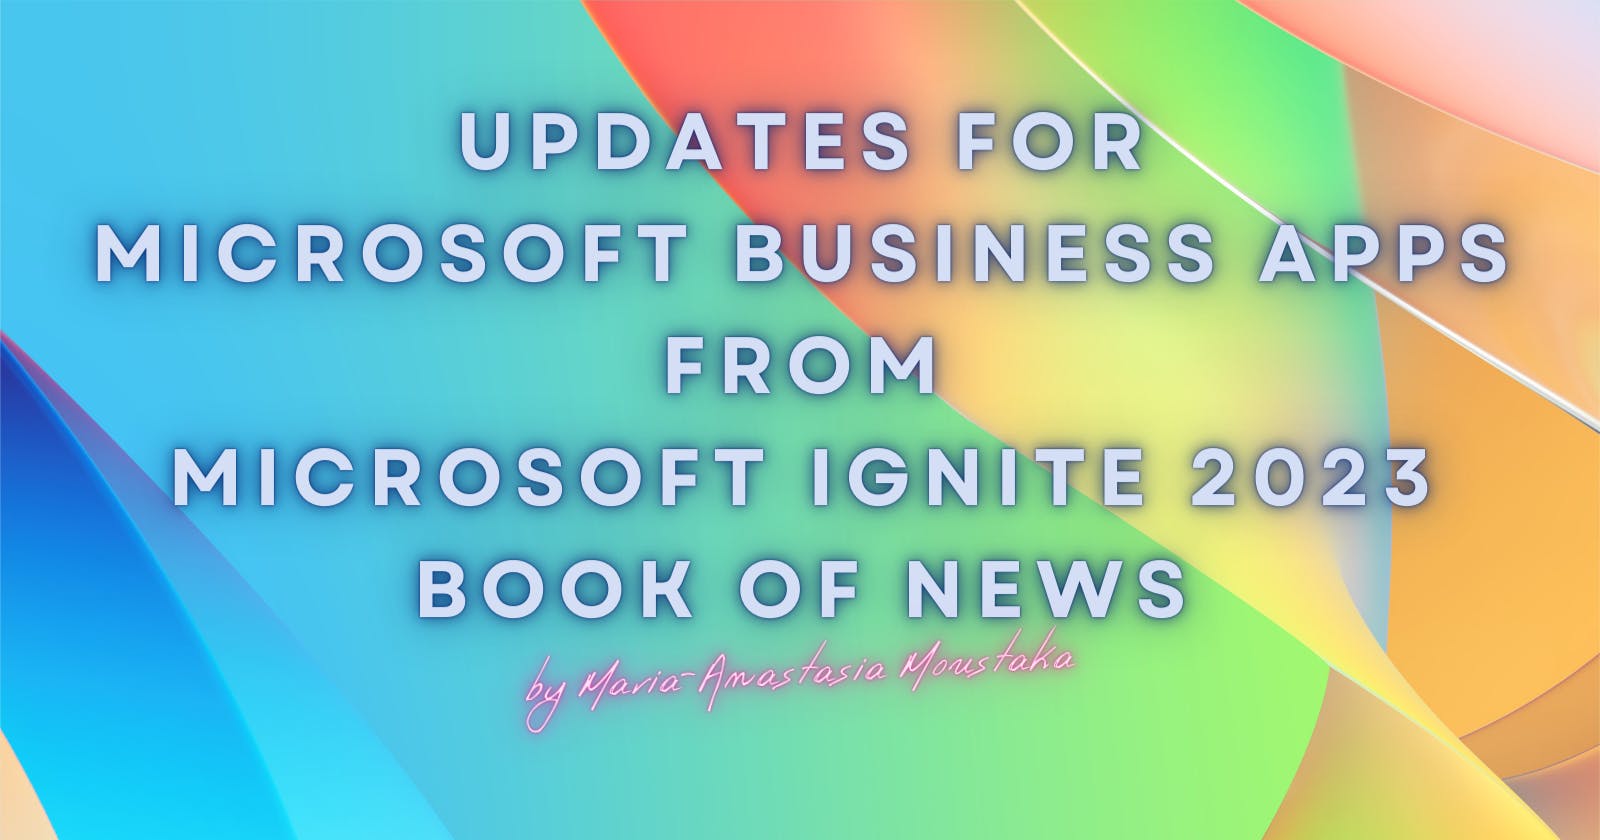 Updates for Microsoft Business Apps from Microsoft Ignite 2023 Book of News